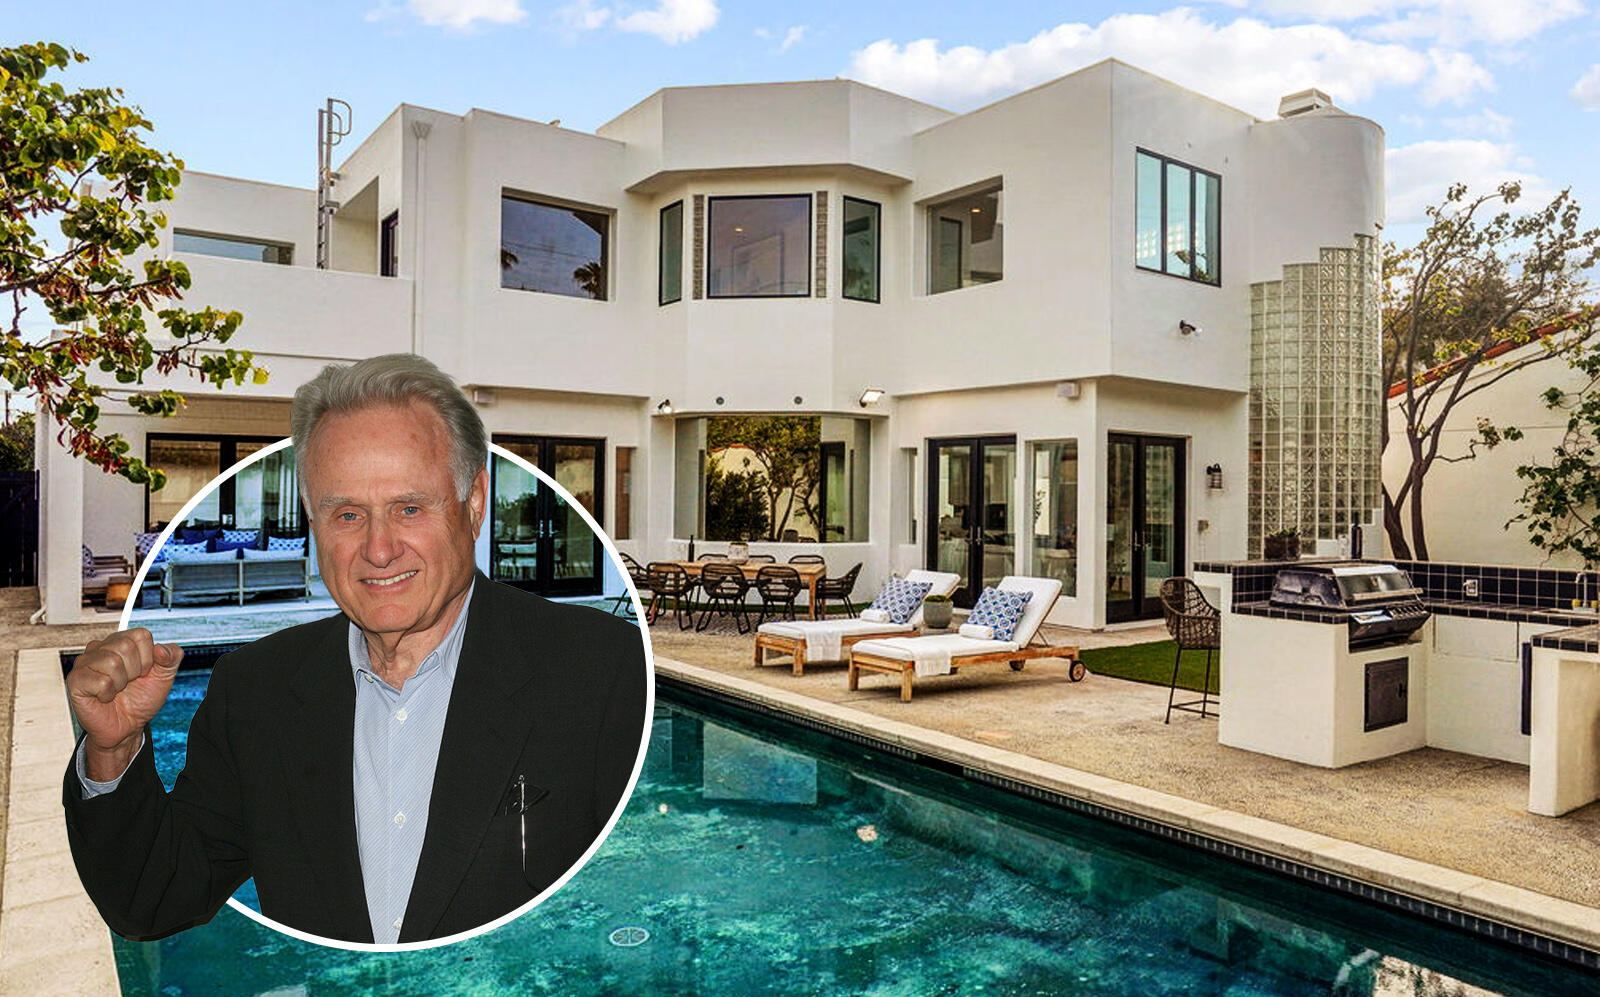 Boxing analyst Larry Merchant and his Santa Monica home (Compass, Getty)